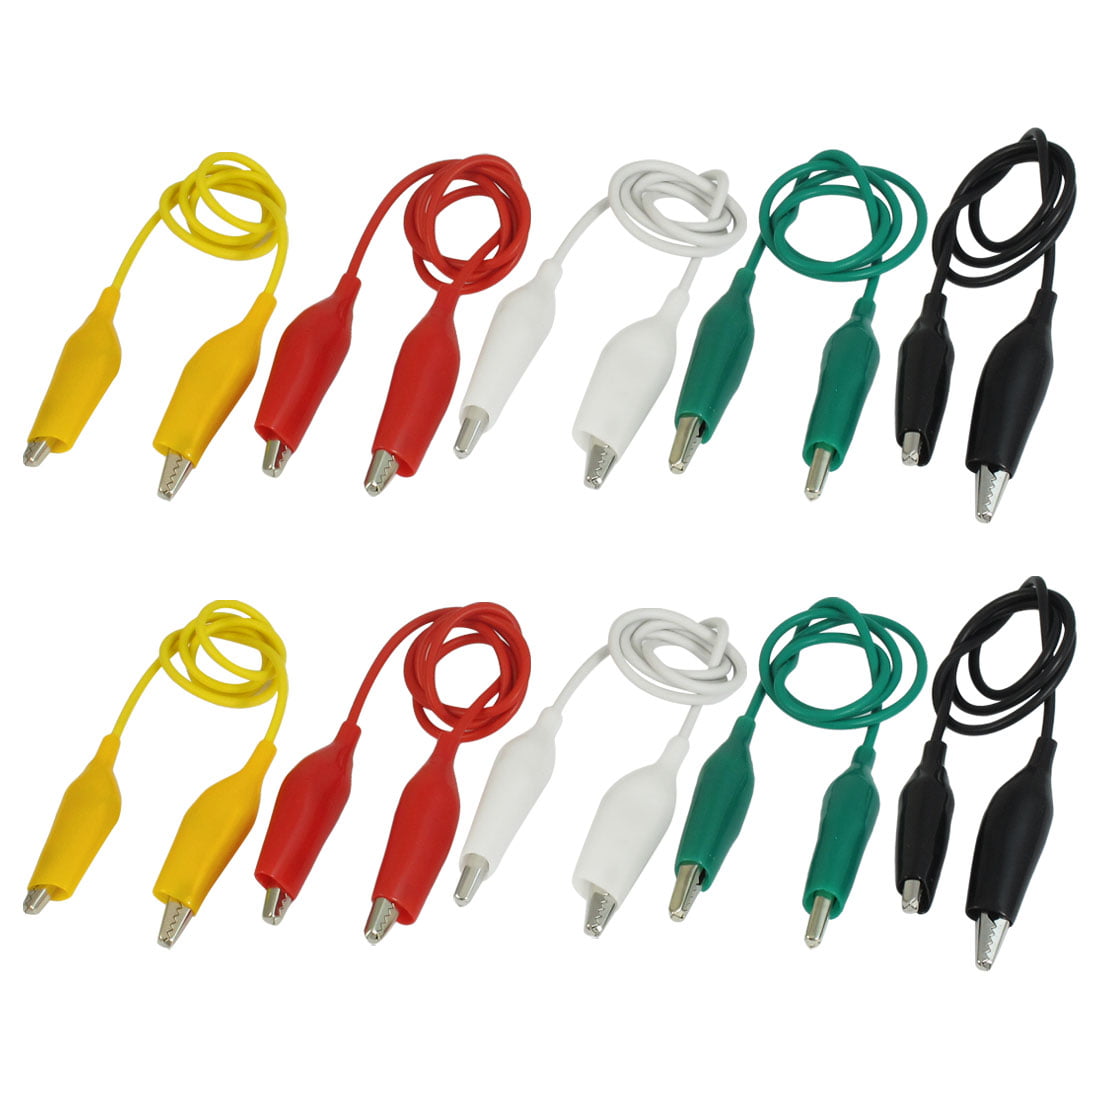 10pc Metered Colored Insulating Test Lead Cable Set Double Ended Alligator Clips 